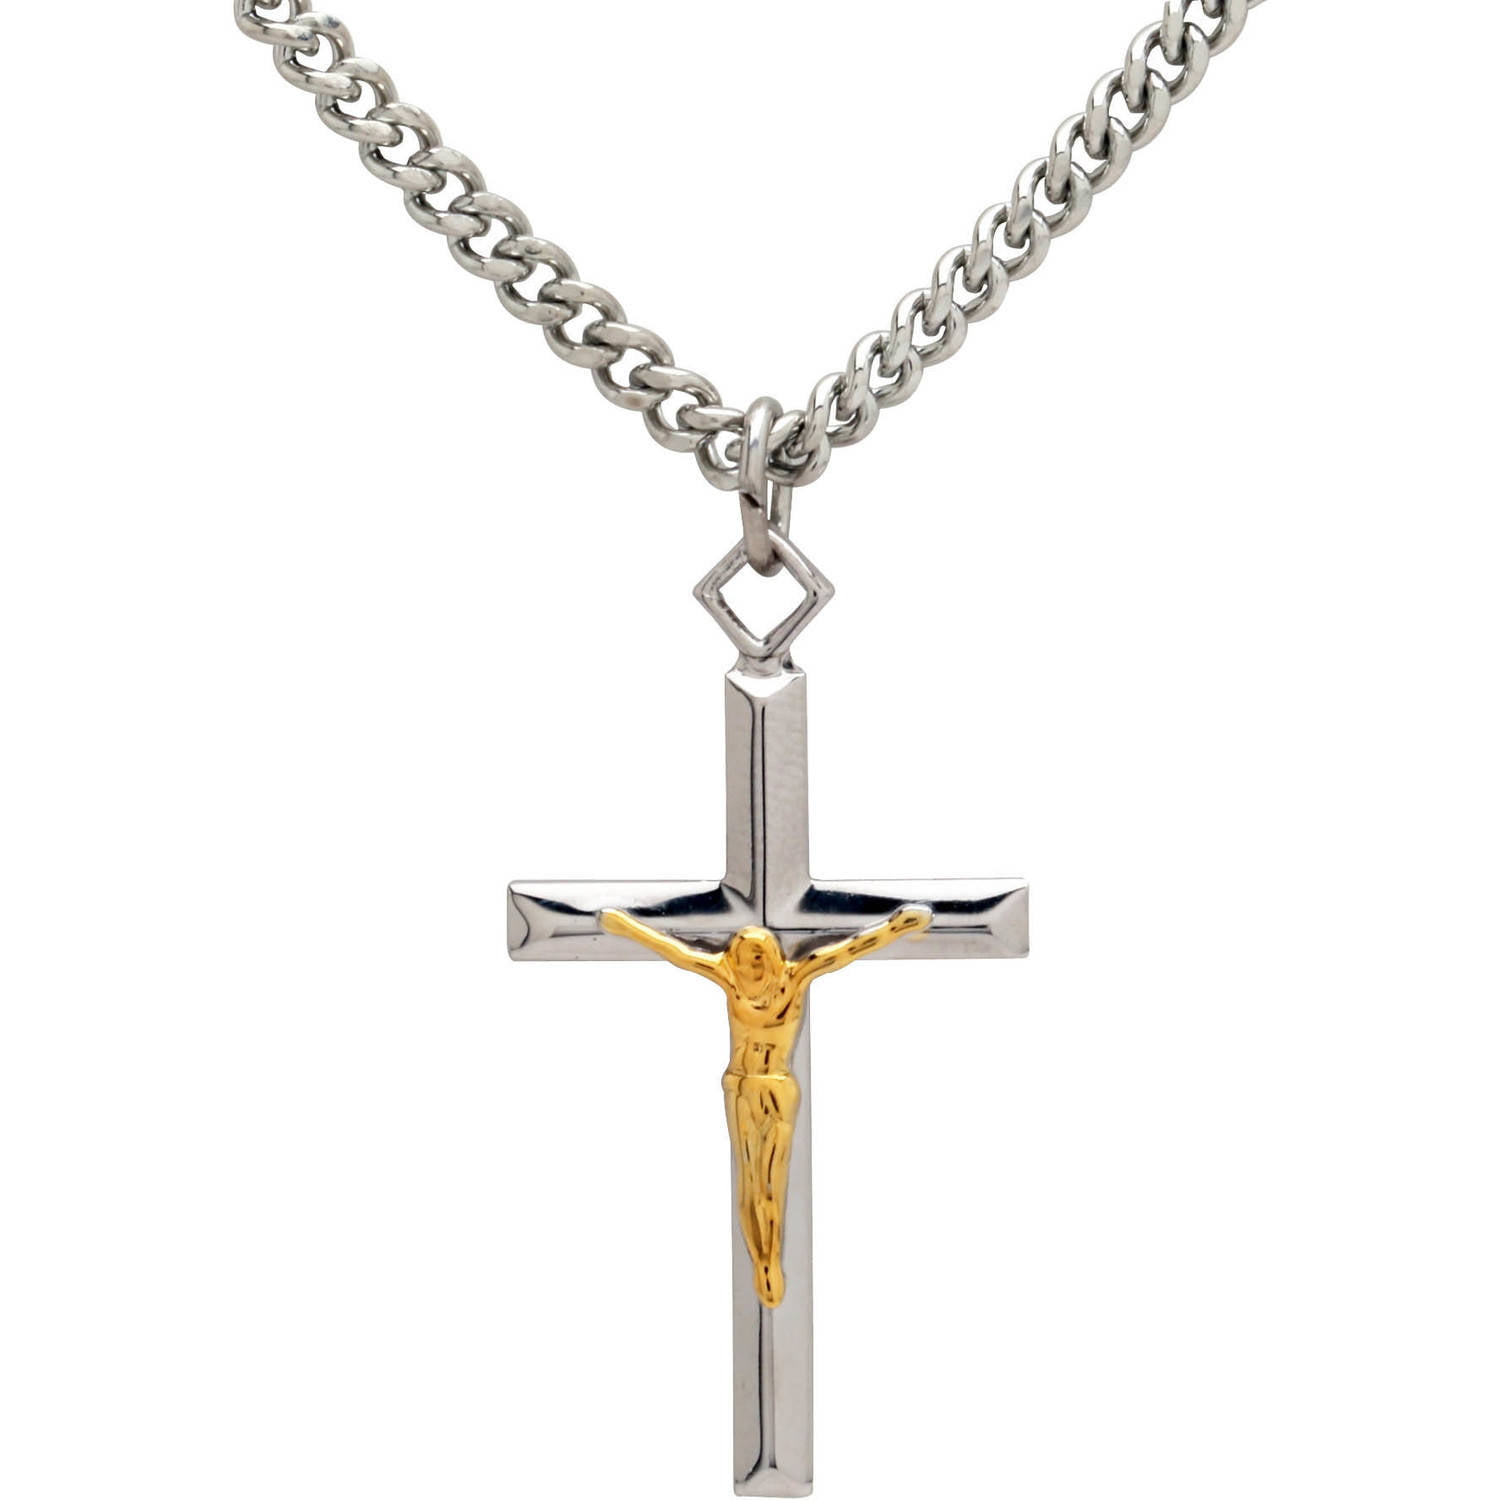 925 Sterling Silver Rhodium plated and Gold Tone Crucifix Pendant Necklace Jewelry Gifts for Women